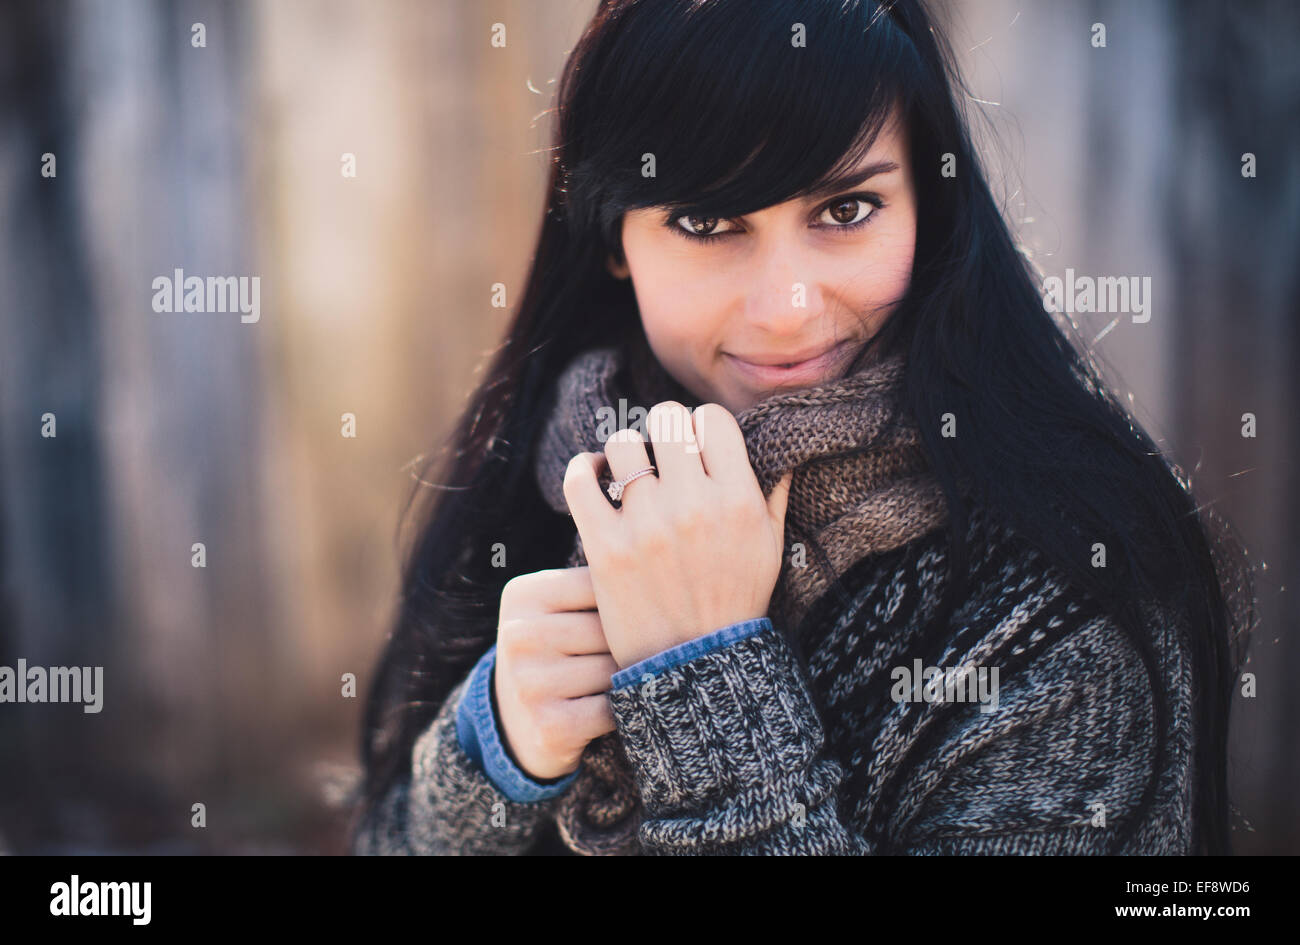 Portrait of a smiling woman wearing warm clothing Stock Photo